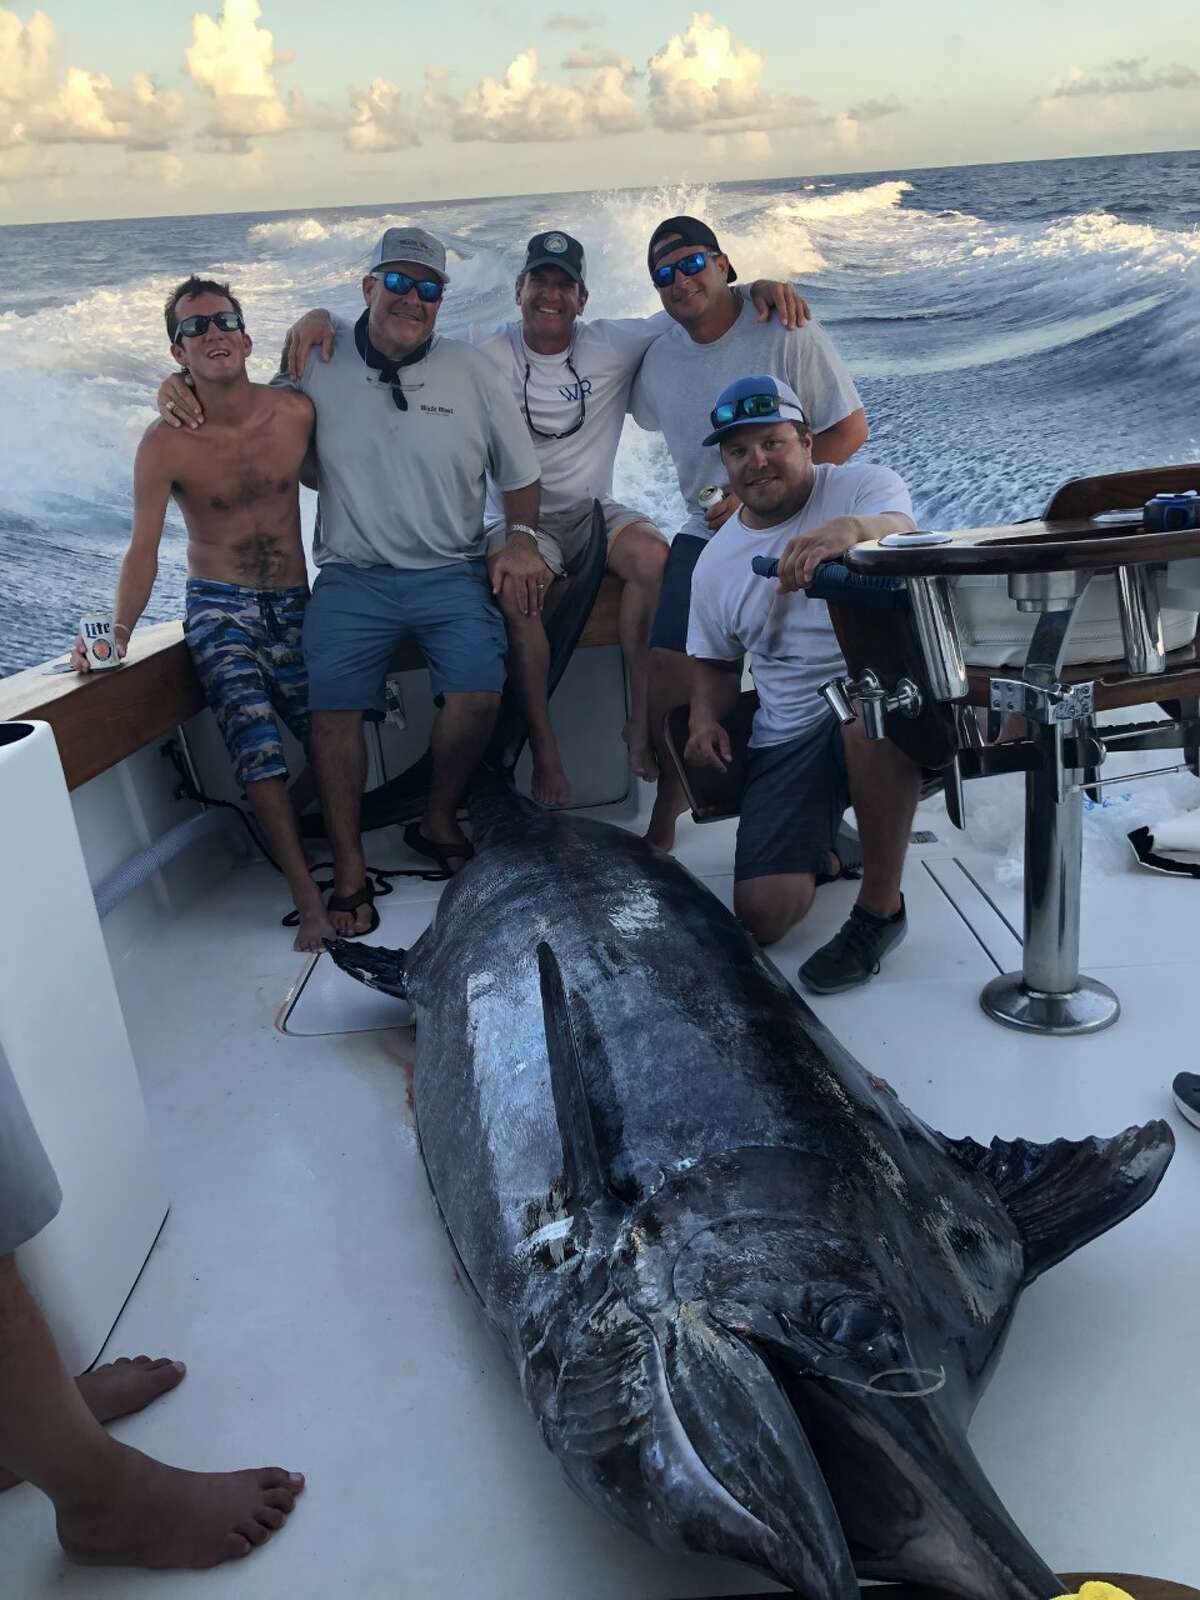 Fishermen competing in a the Texas Billfish Tournament last Friday caught a massive 737-pound blue marlin. According to tournament organizer Dave Cochrane, the fish was the largest blue marlin to ever be weighed in at Port Aransas.